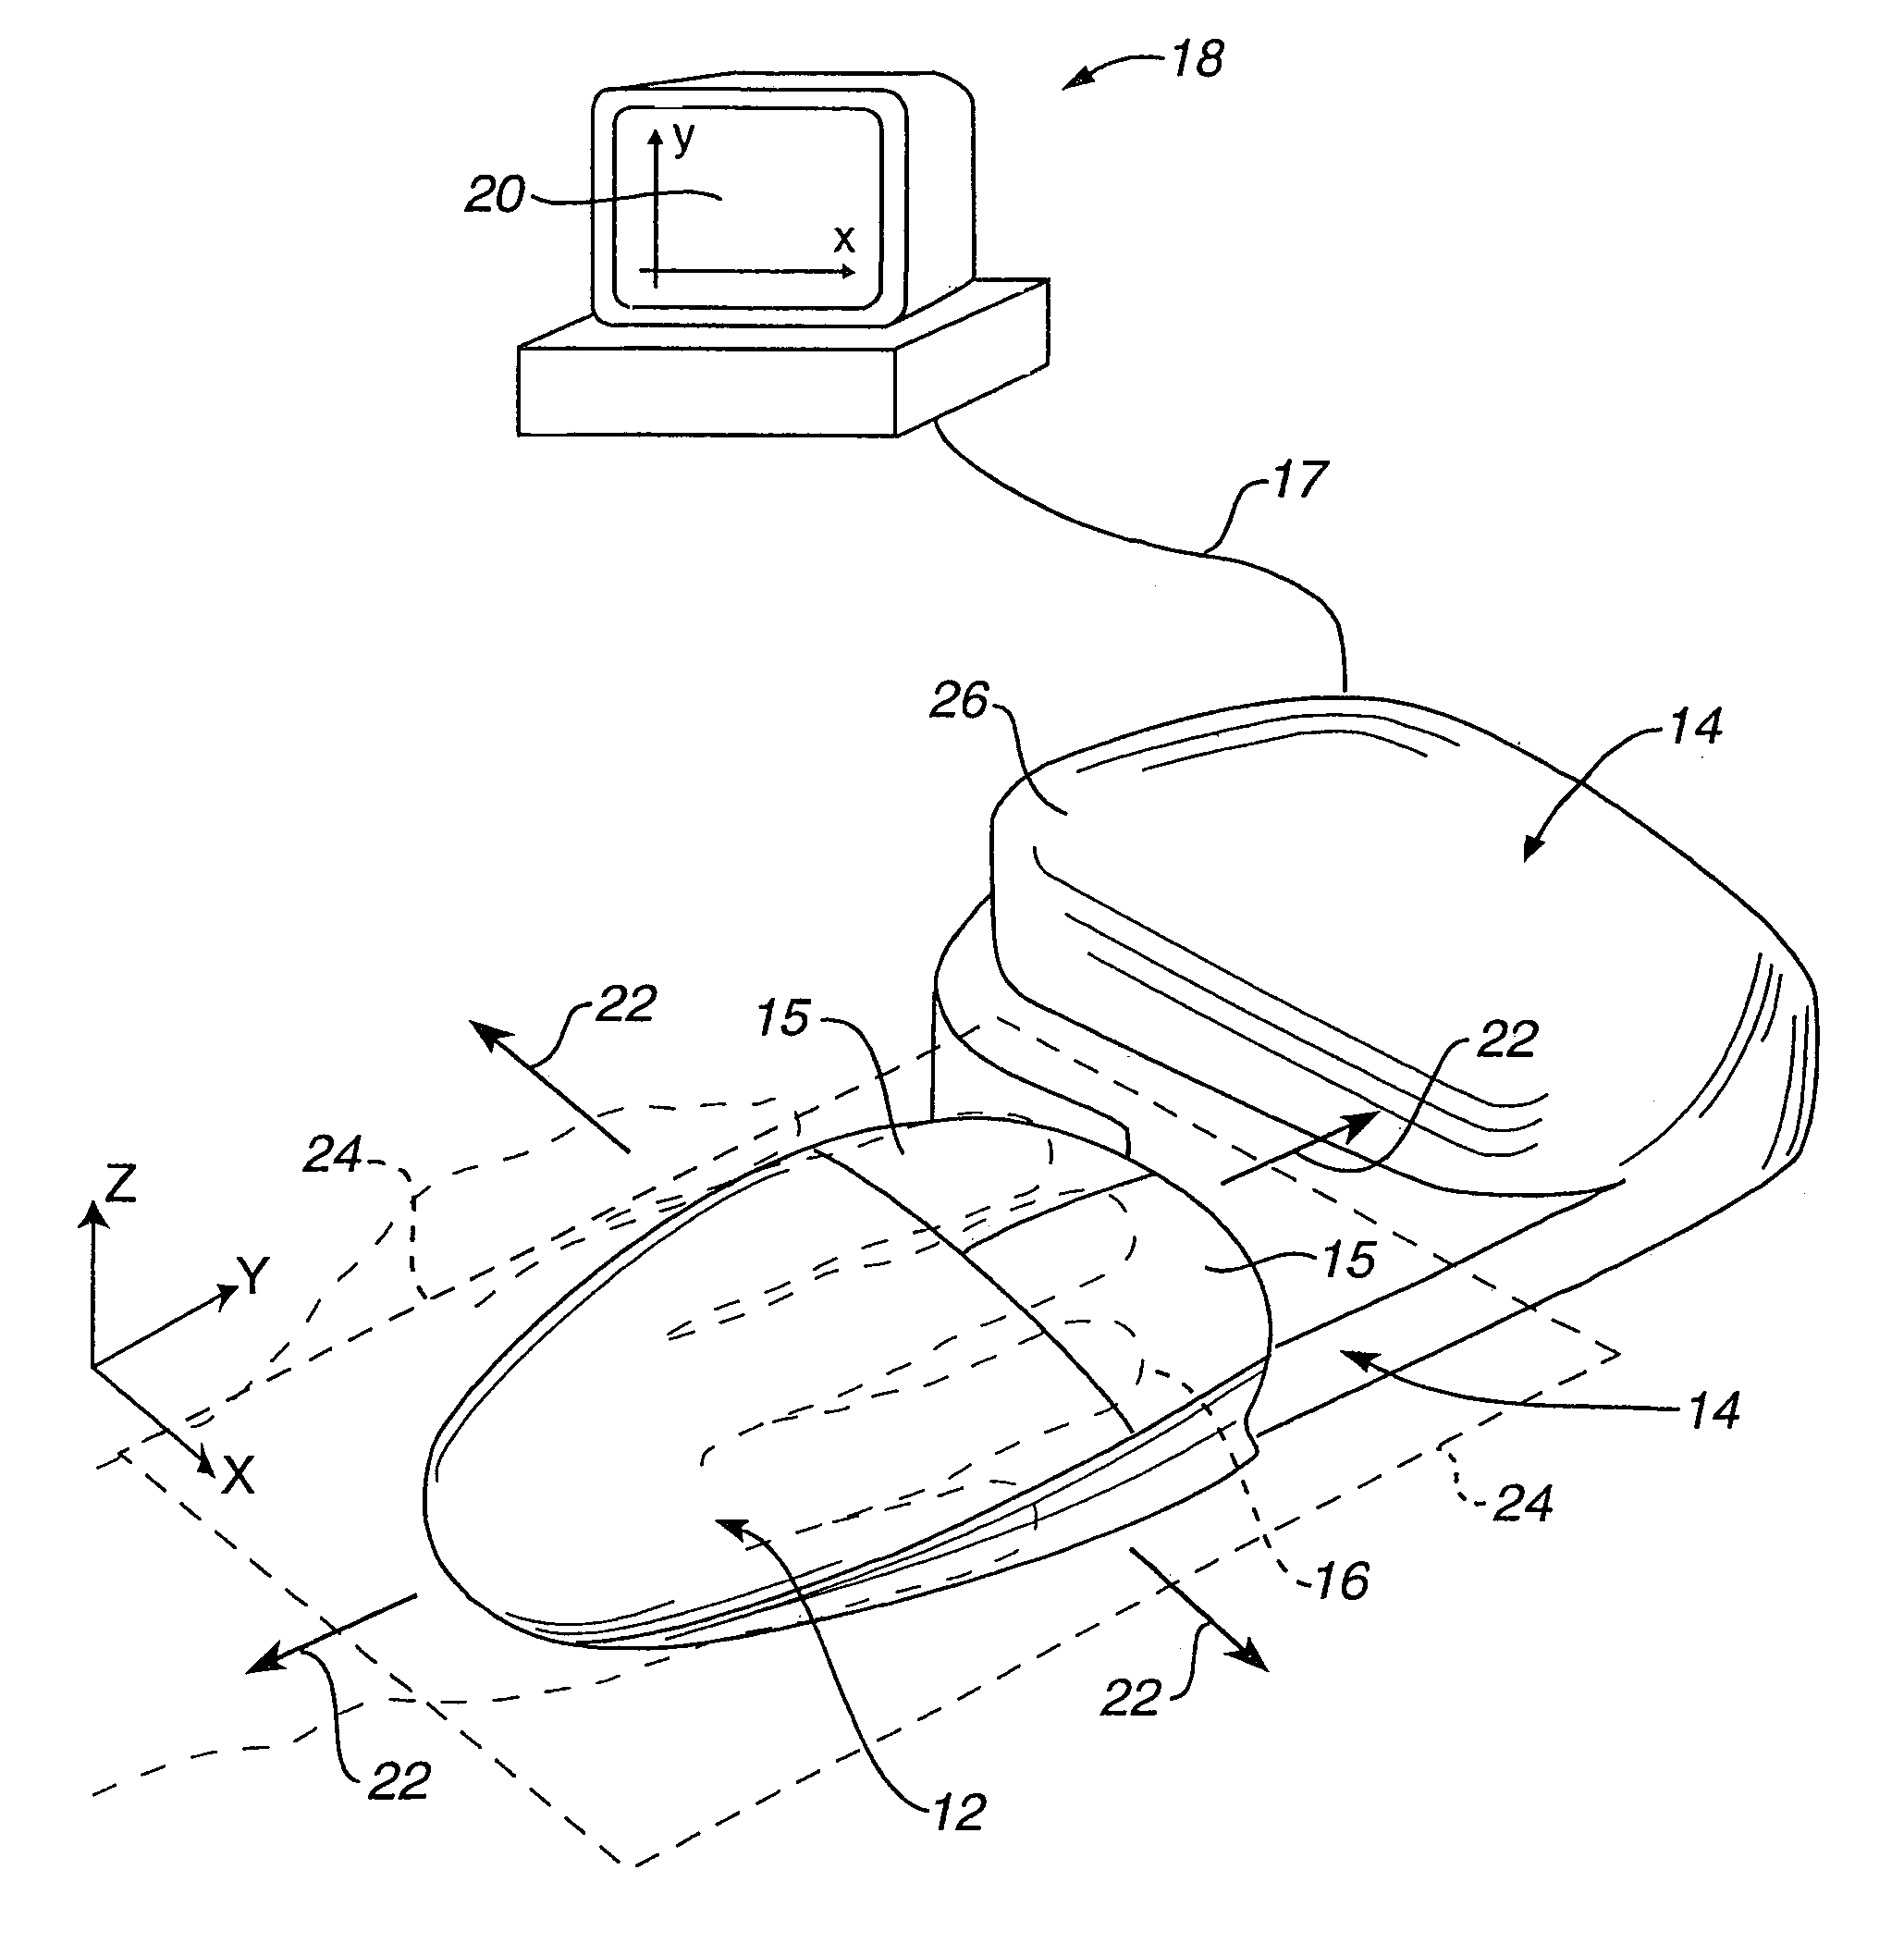 Force feedback interface device with sensor